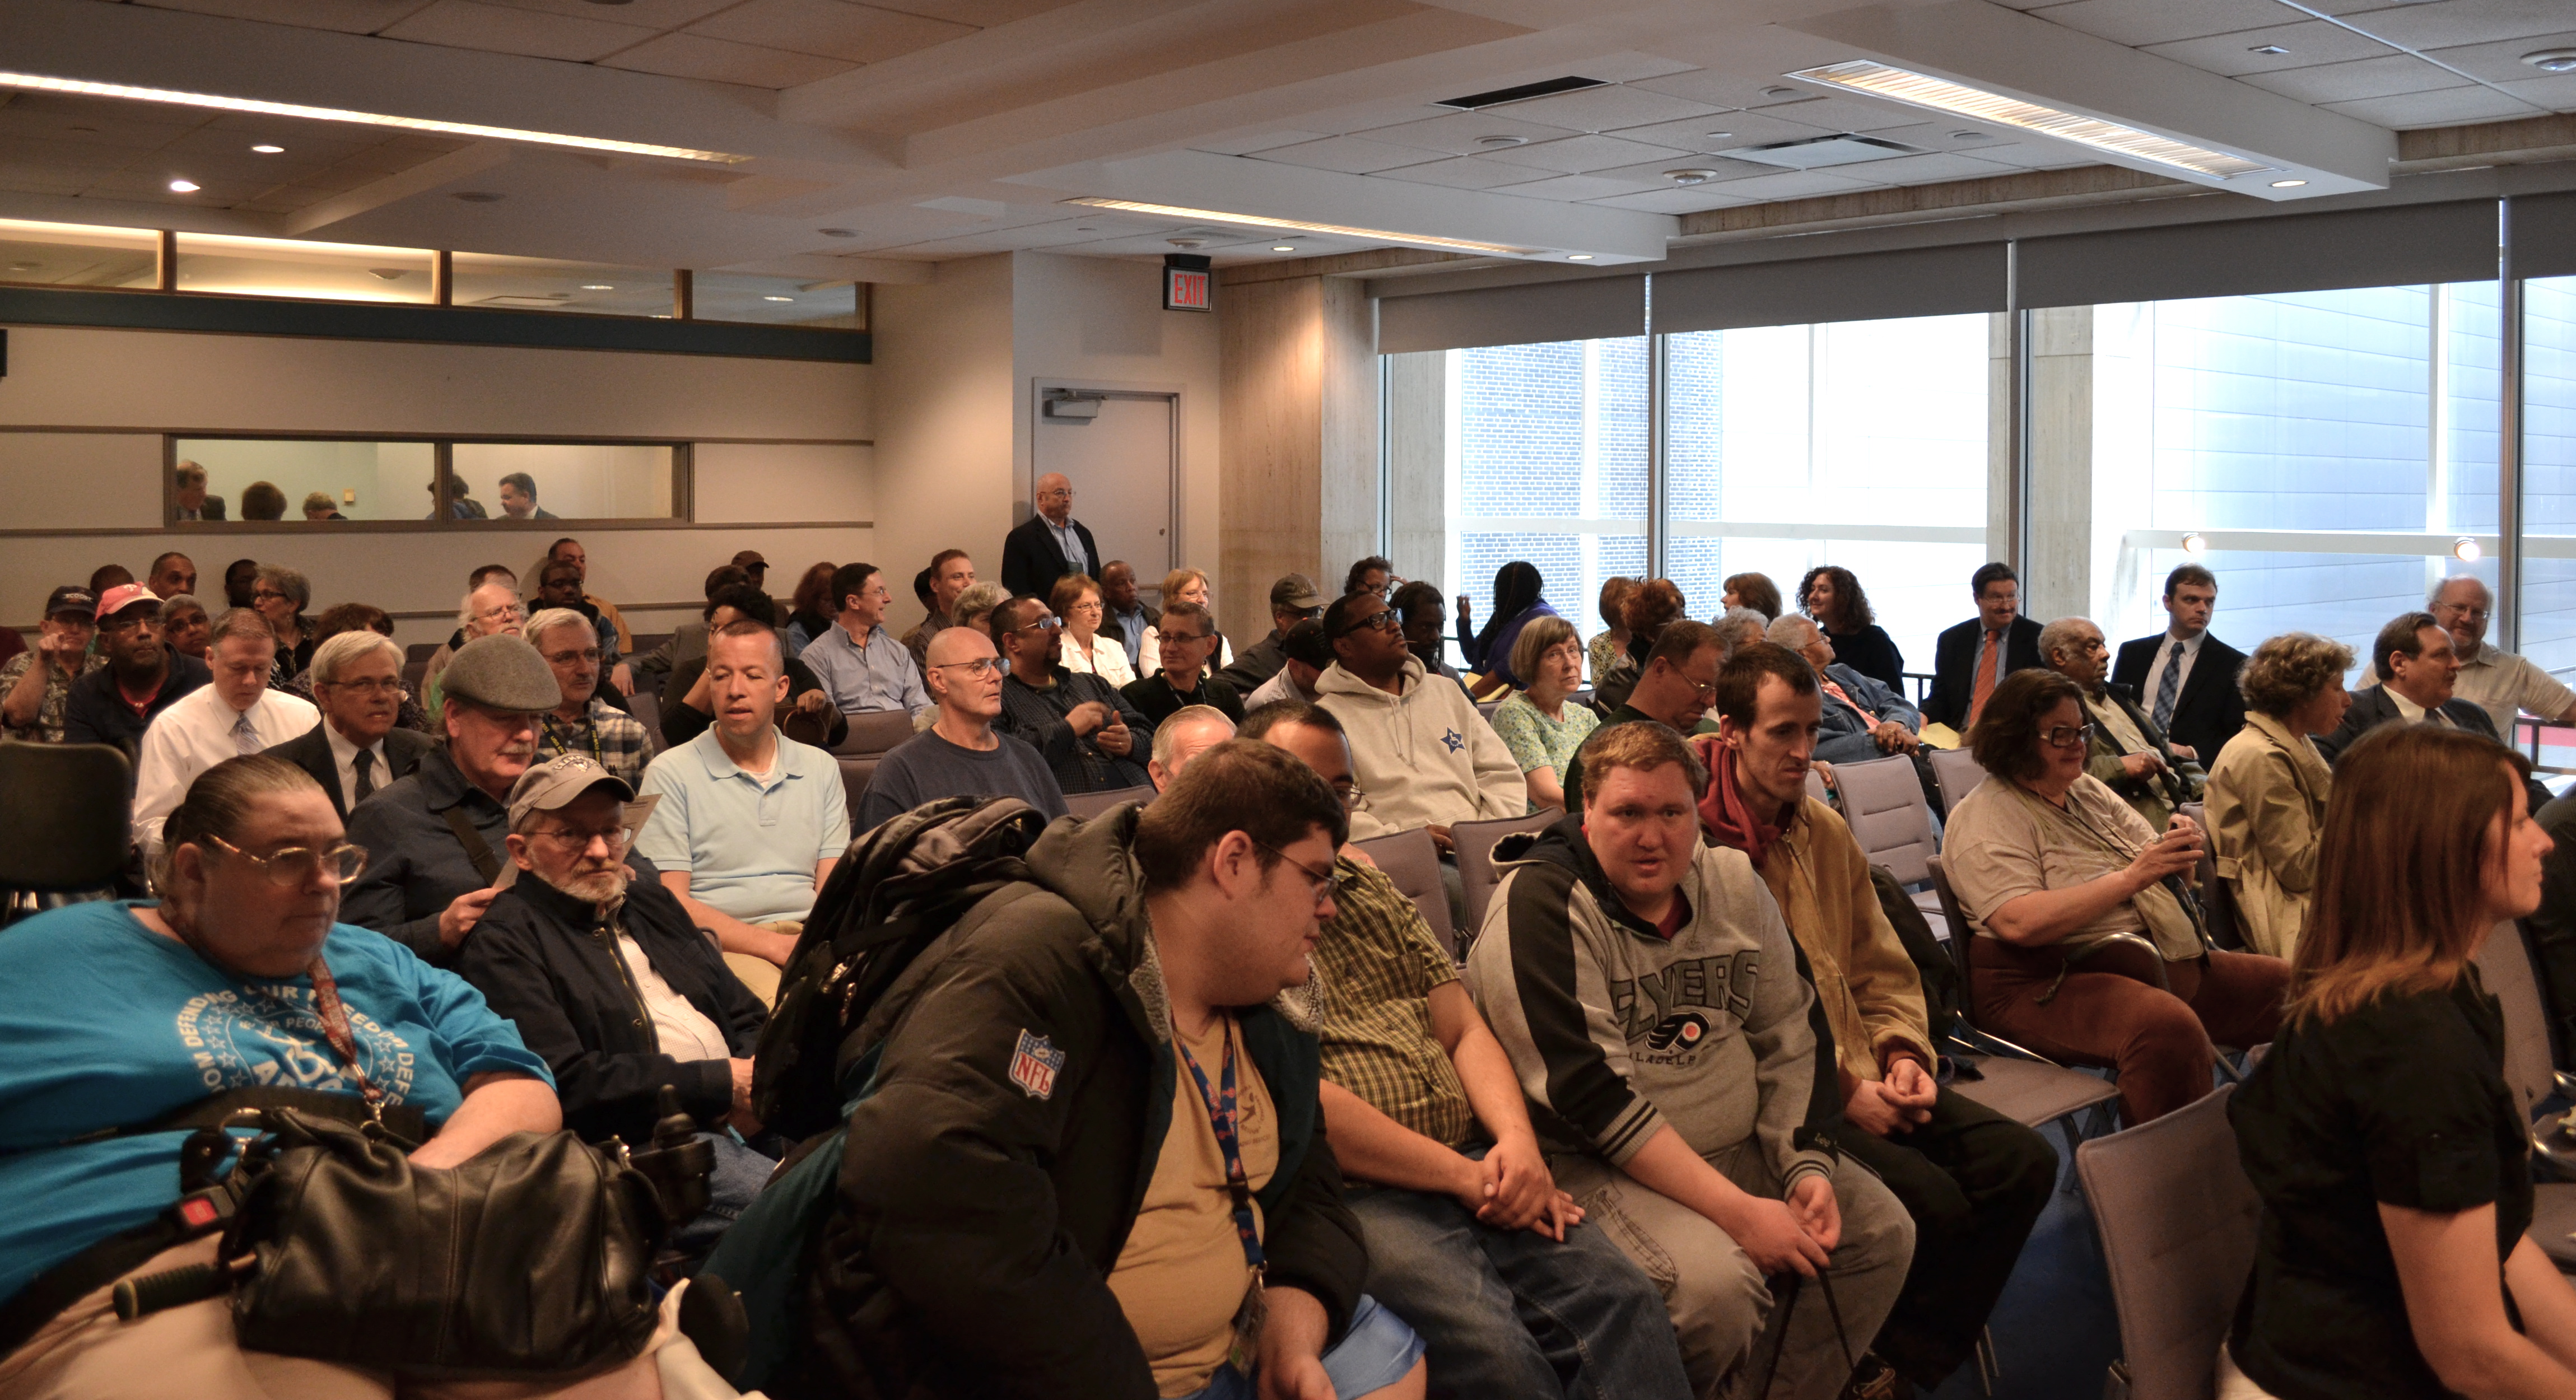 SEPTA's public hearings on the proposed fare increases drew packed meeting rooms this month